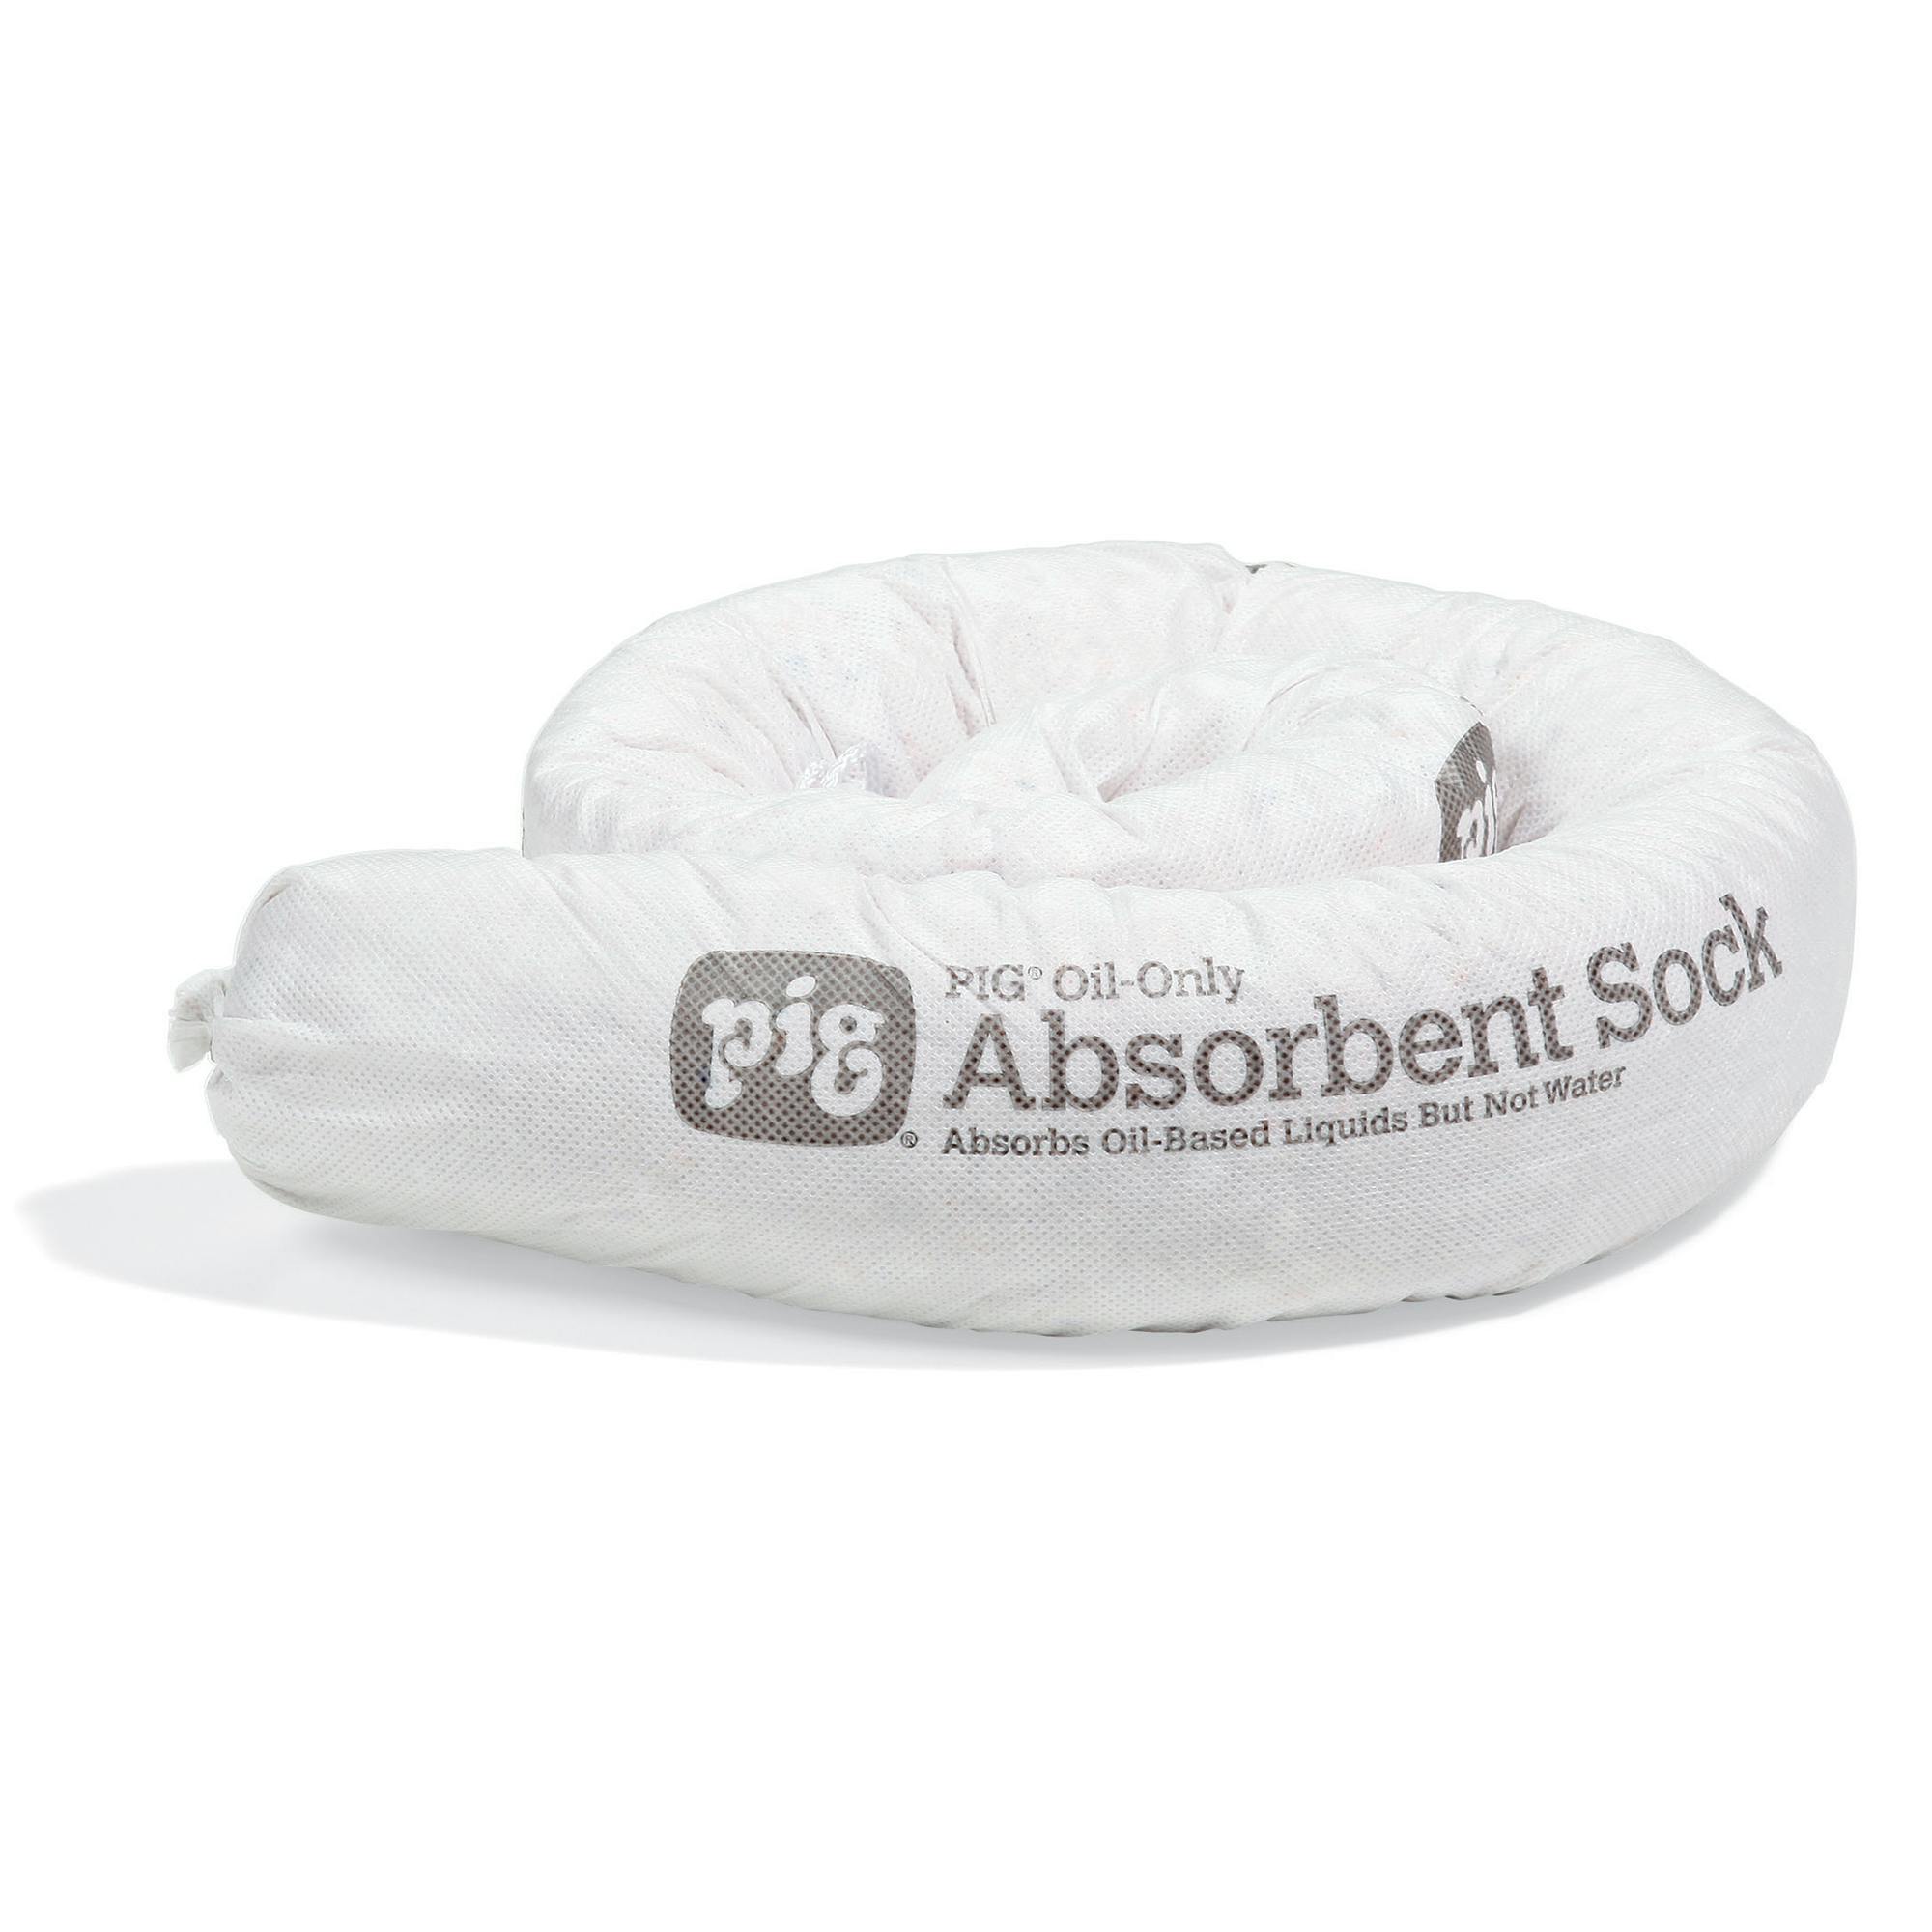 New Pig Corporation SKM210 PIG Oil-Only Absorbent Sock 3x48 12/box